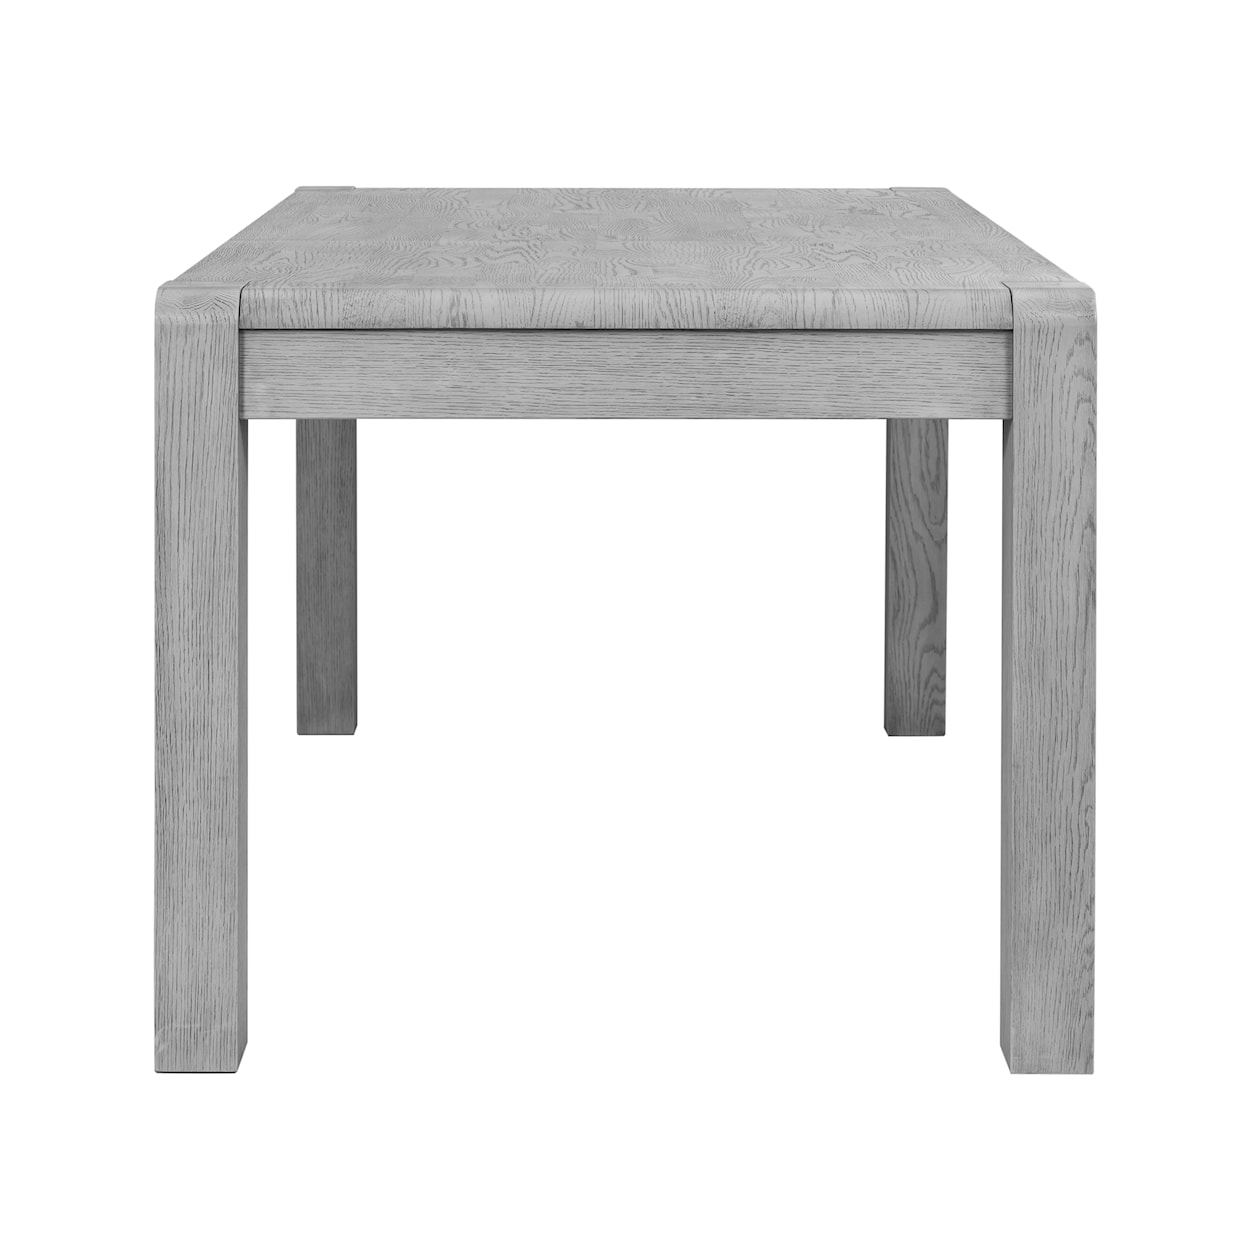 Global Home Amsterdam Dining Extension Table